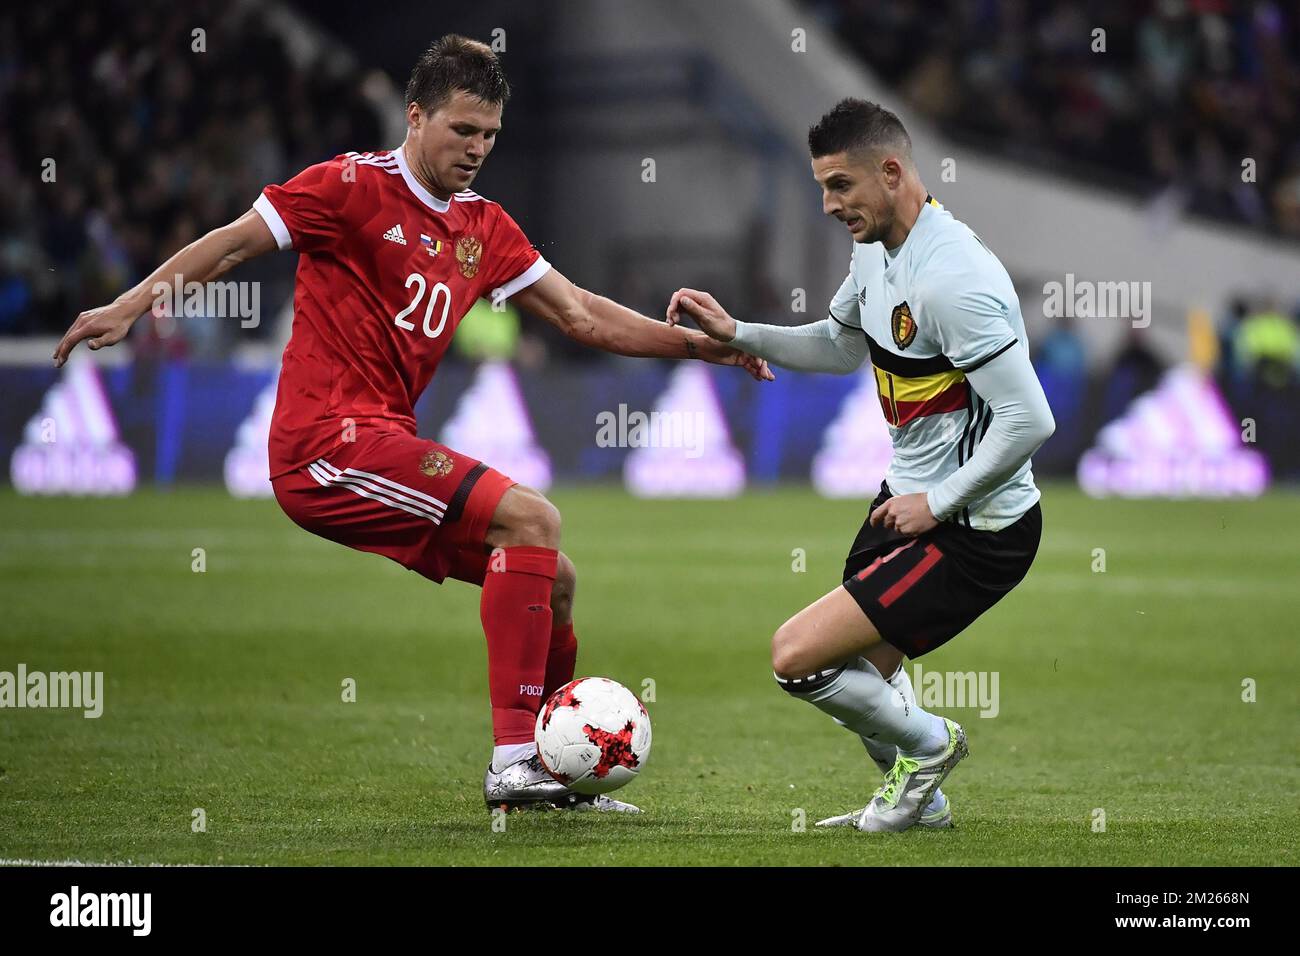 Russia's Maksim Kanunnikov and Belgium's Kevin Mirallas fight for the ball during a friendly game between Belgium's Red Devils and Russia, on Tuesday 28 March 2017, in Adler, Russia. BELGA PHOTO DIRK WAEM Stock Photo